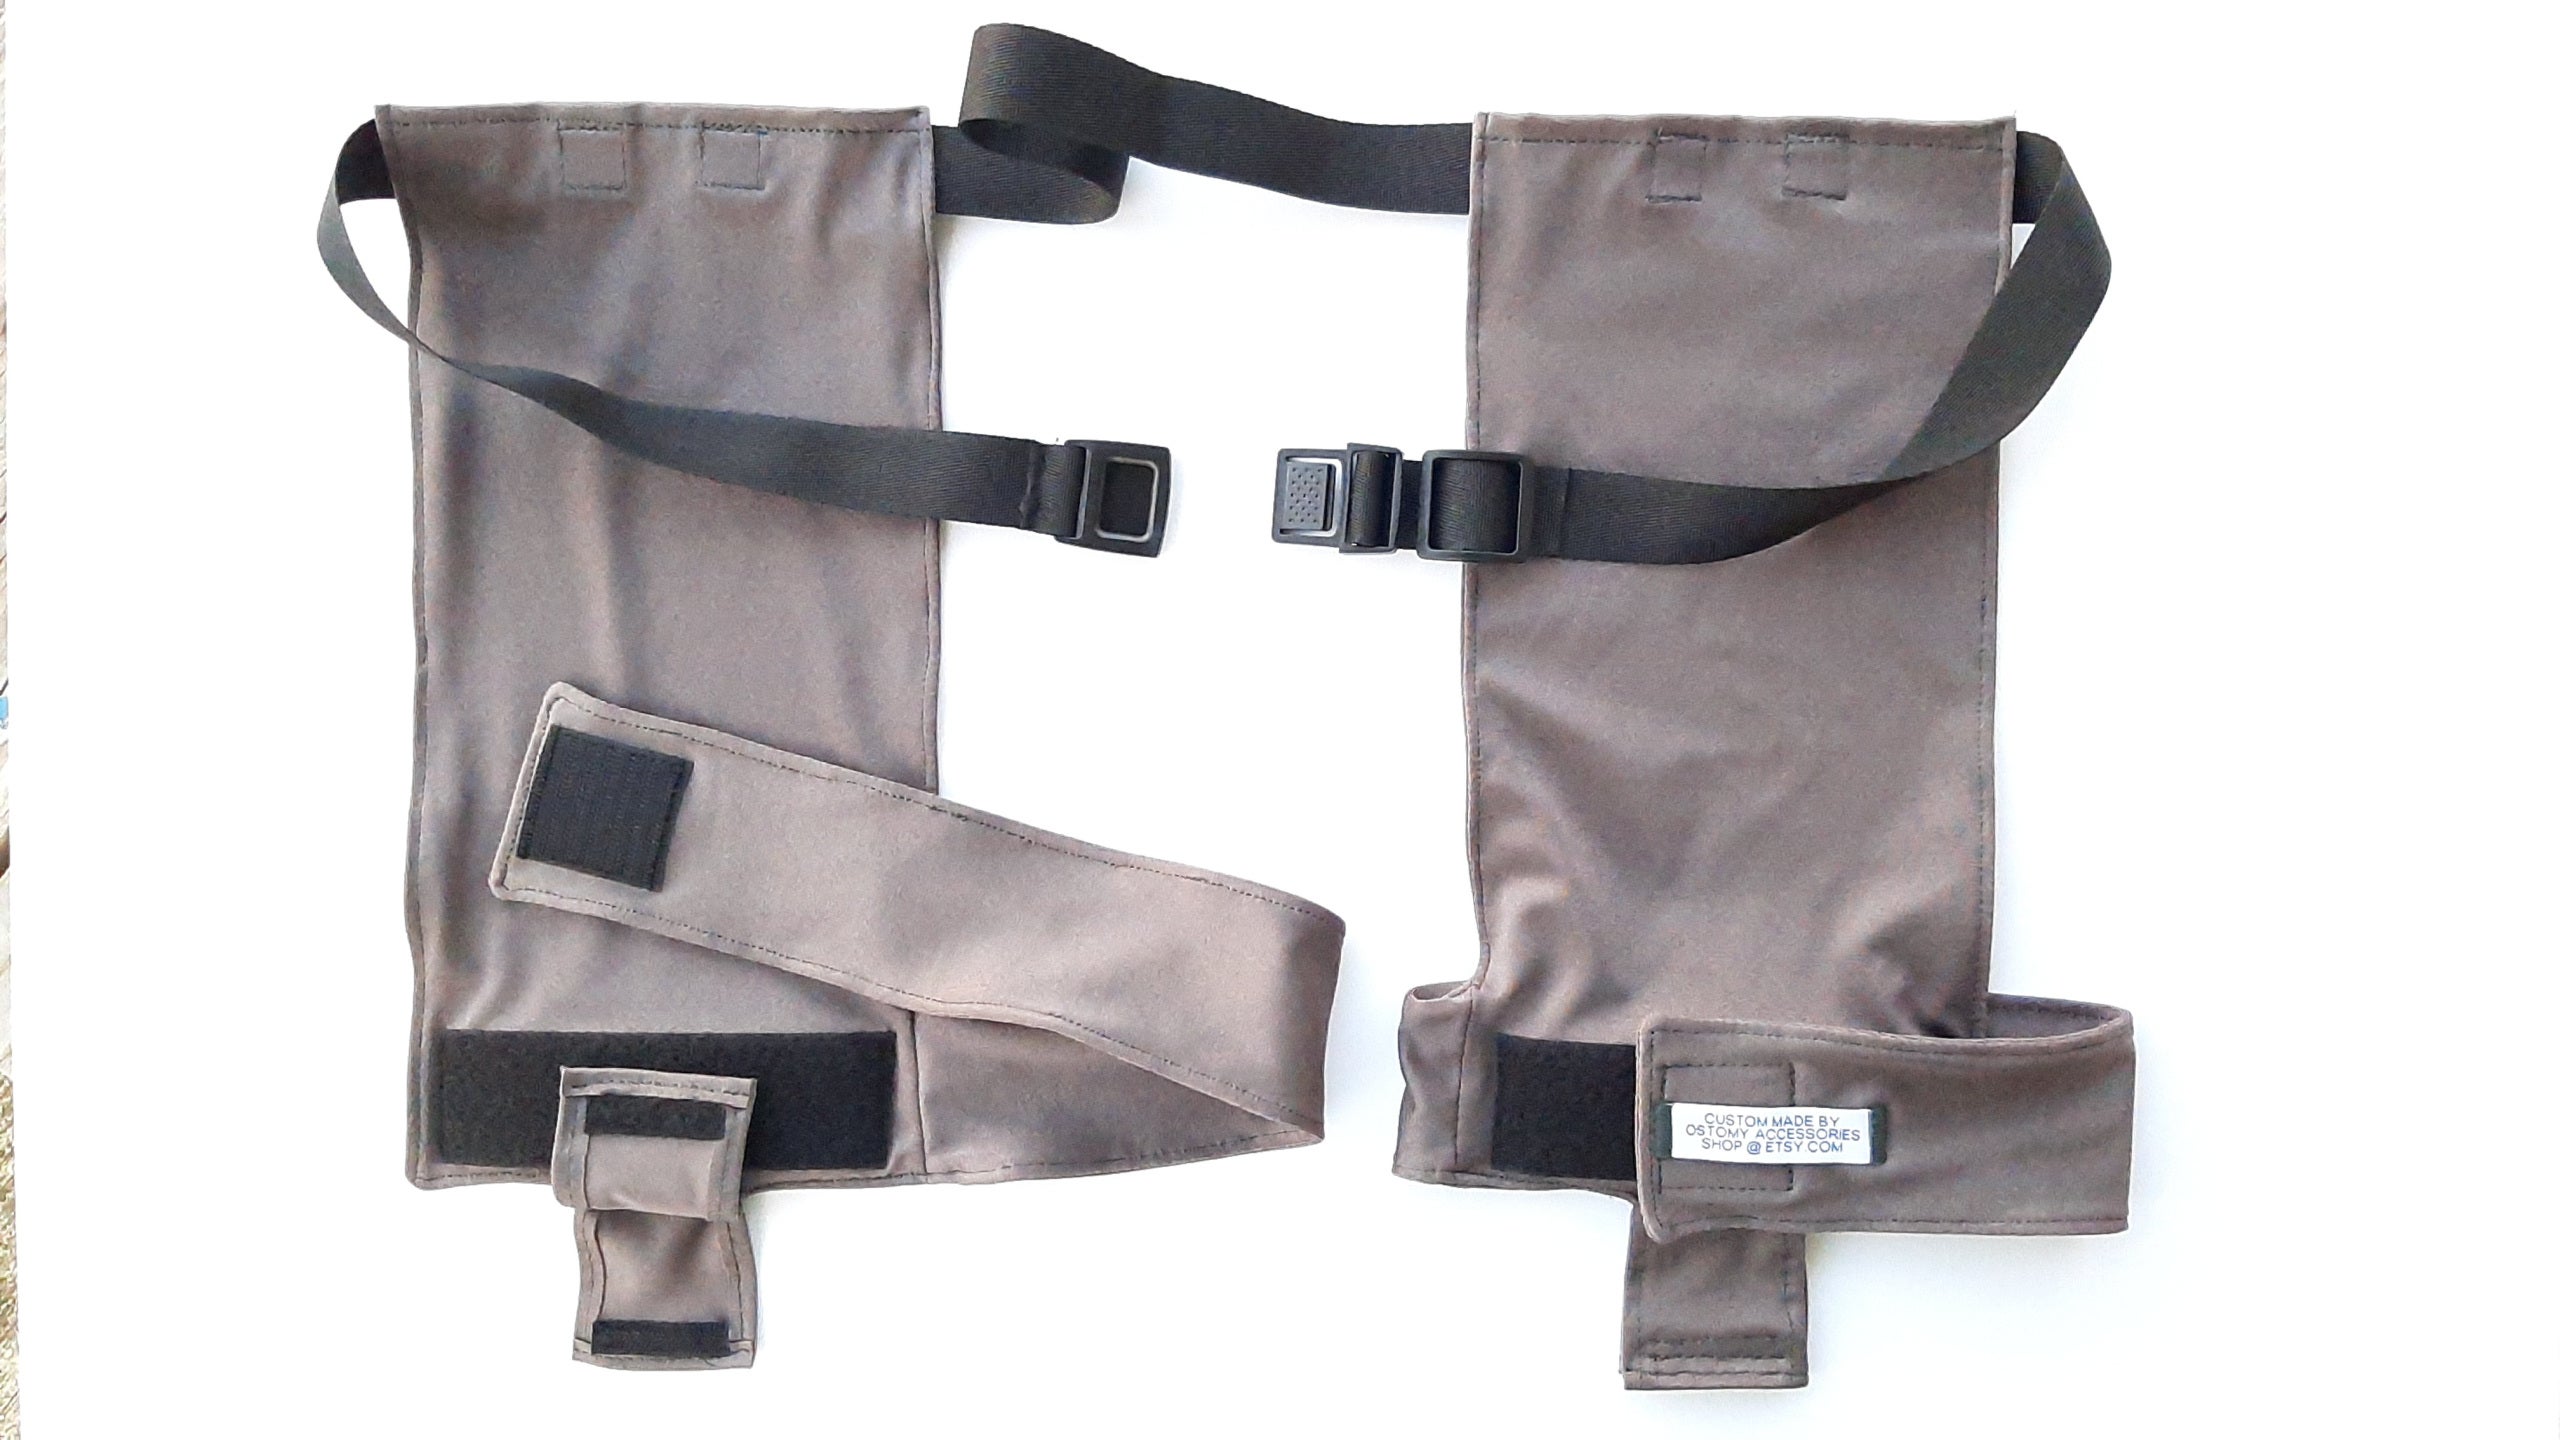 Catheter & Leg Bag Fixation Devices | Straps, Sleeves & Clips | Vyne